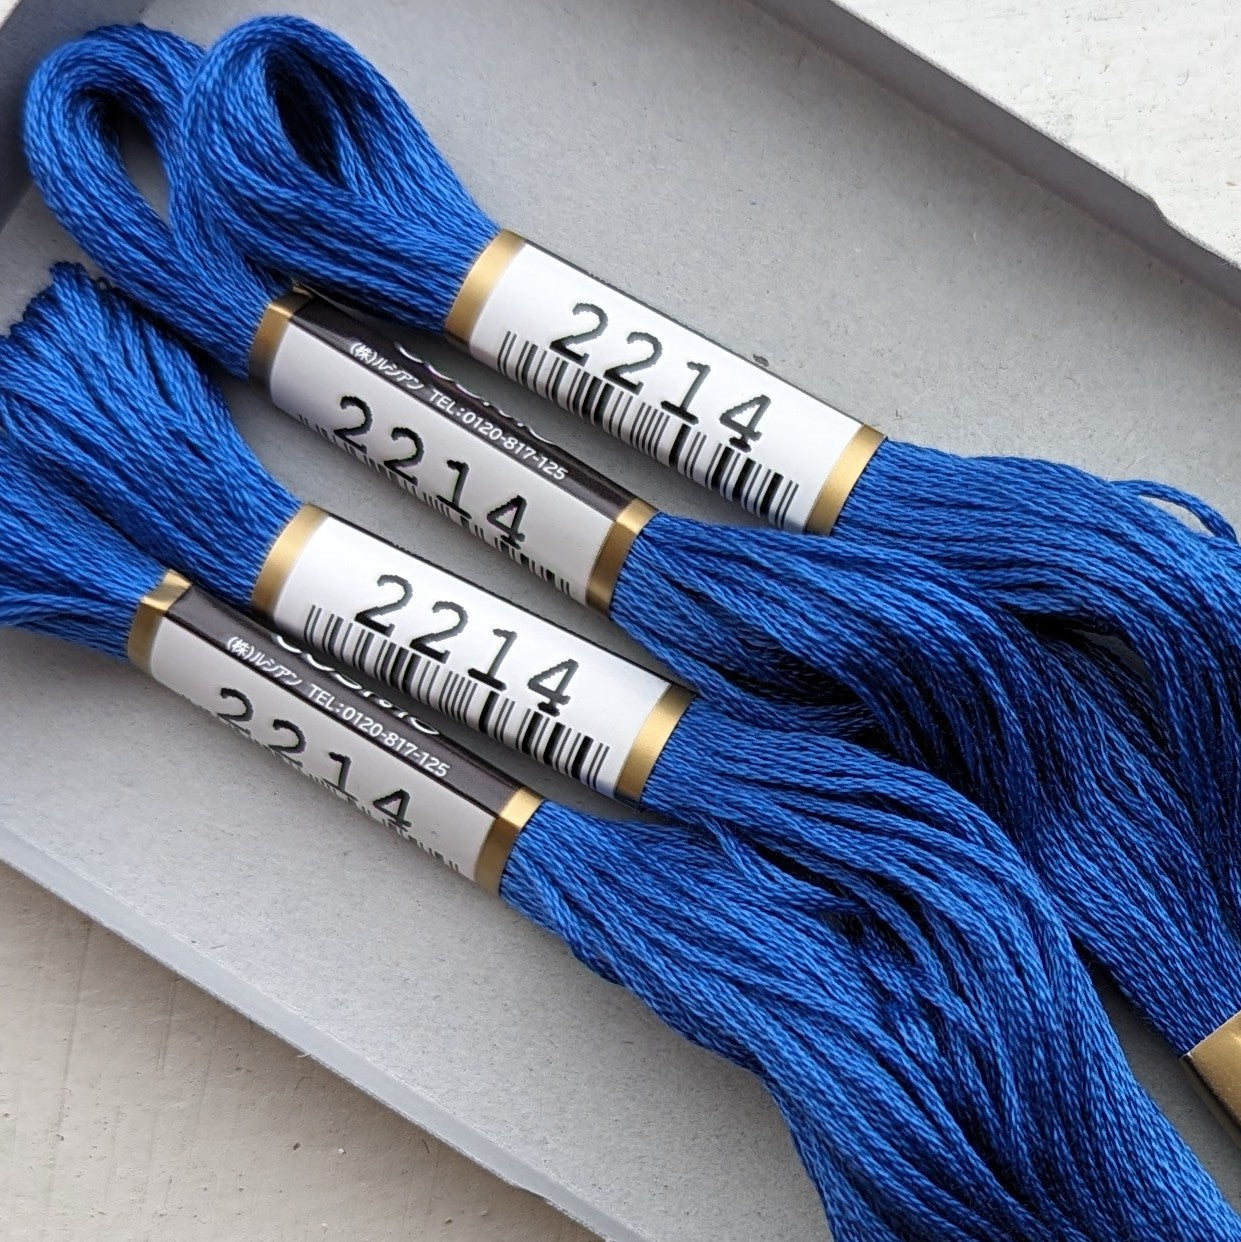 Cosmo embroidery floss